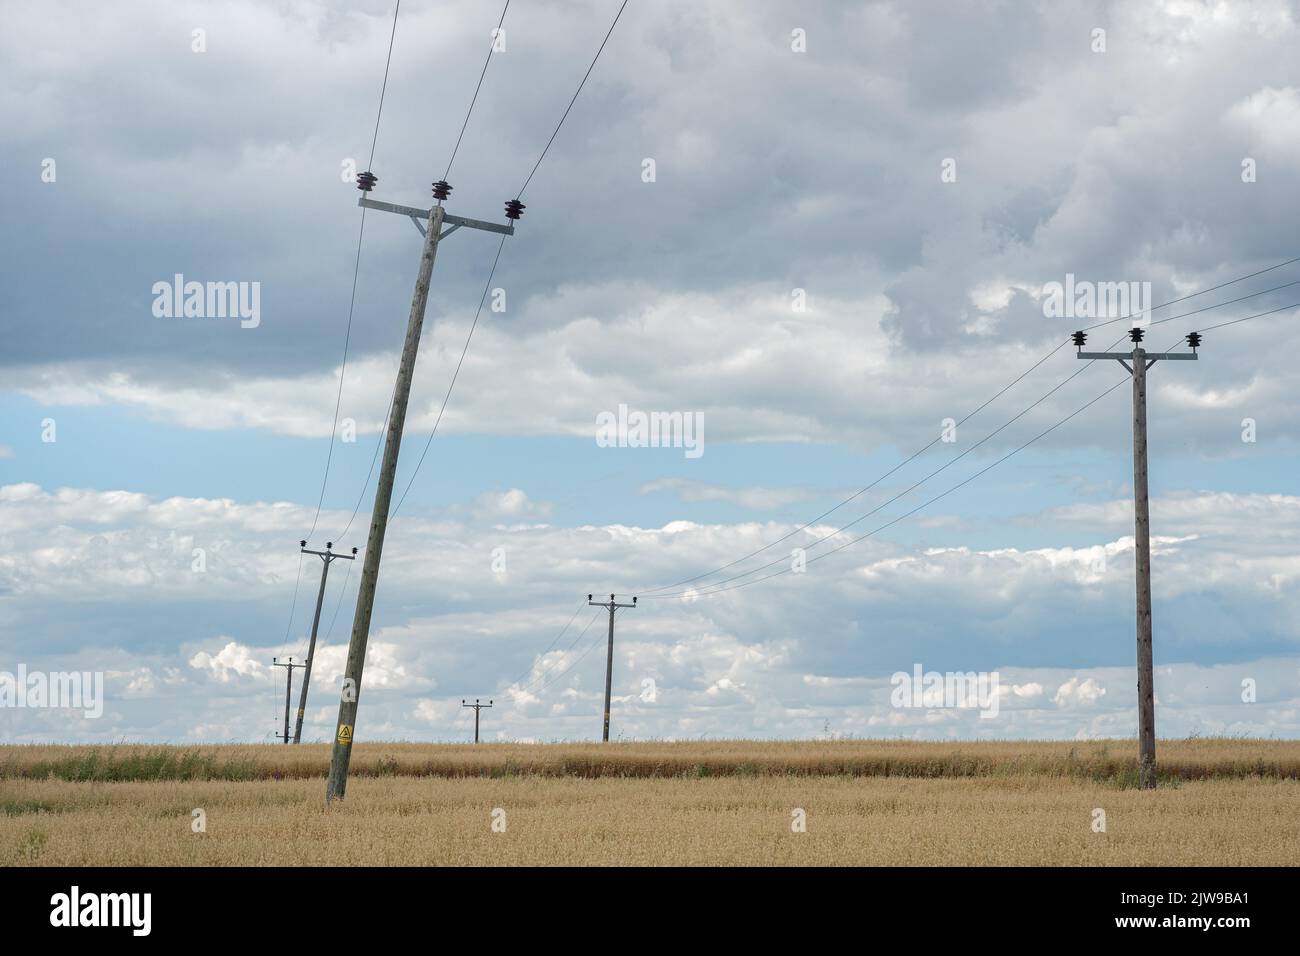 Telegraph Poles in the Countryside, With Power Cables. Stock Photo